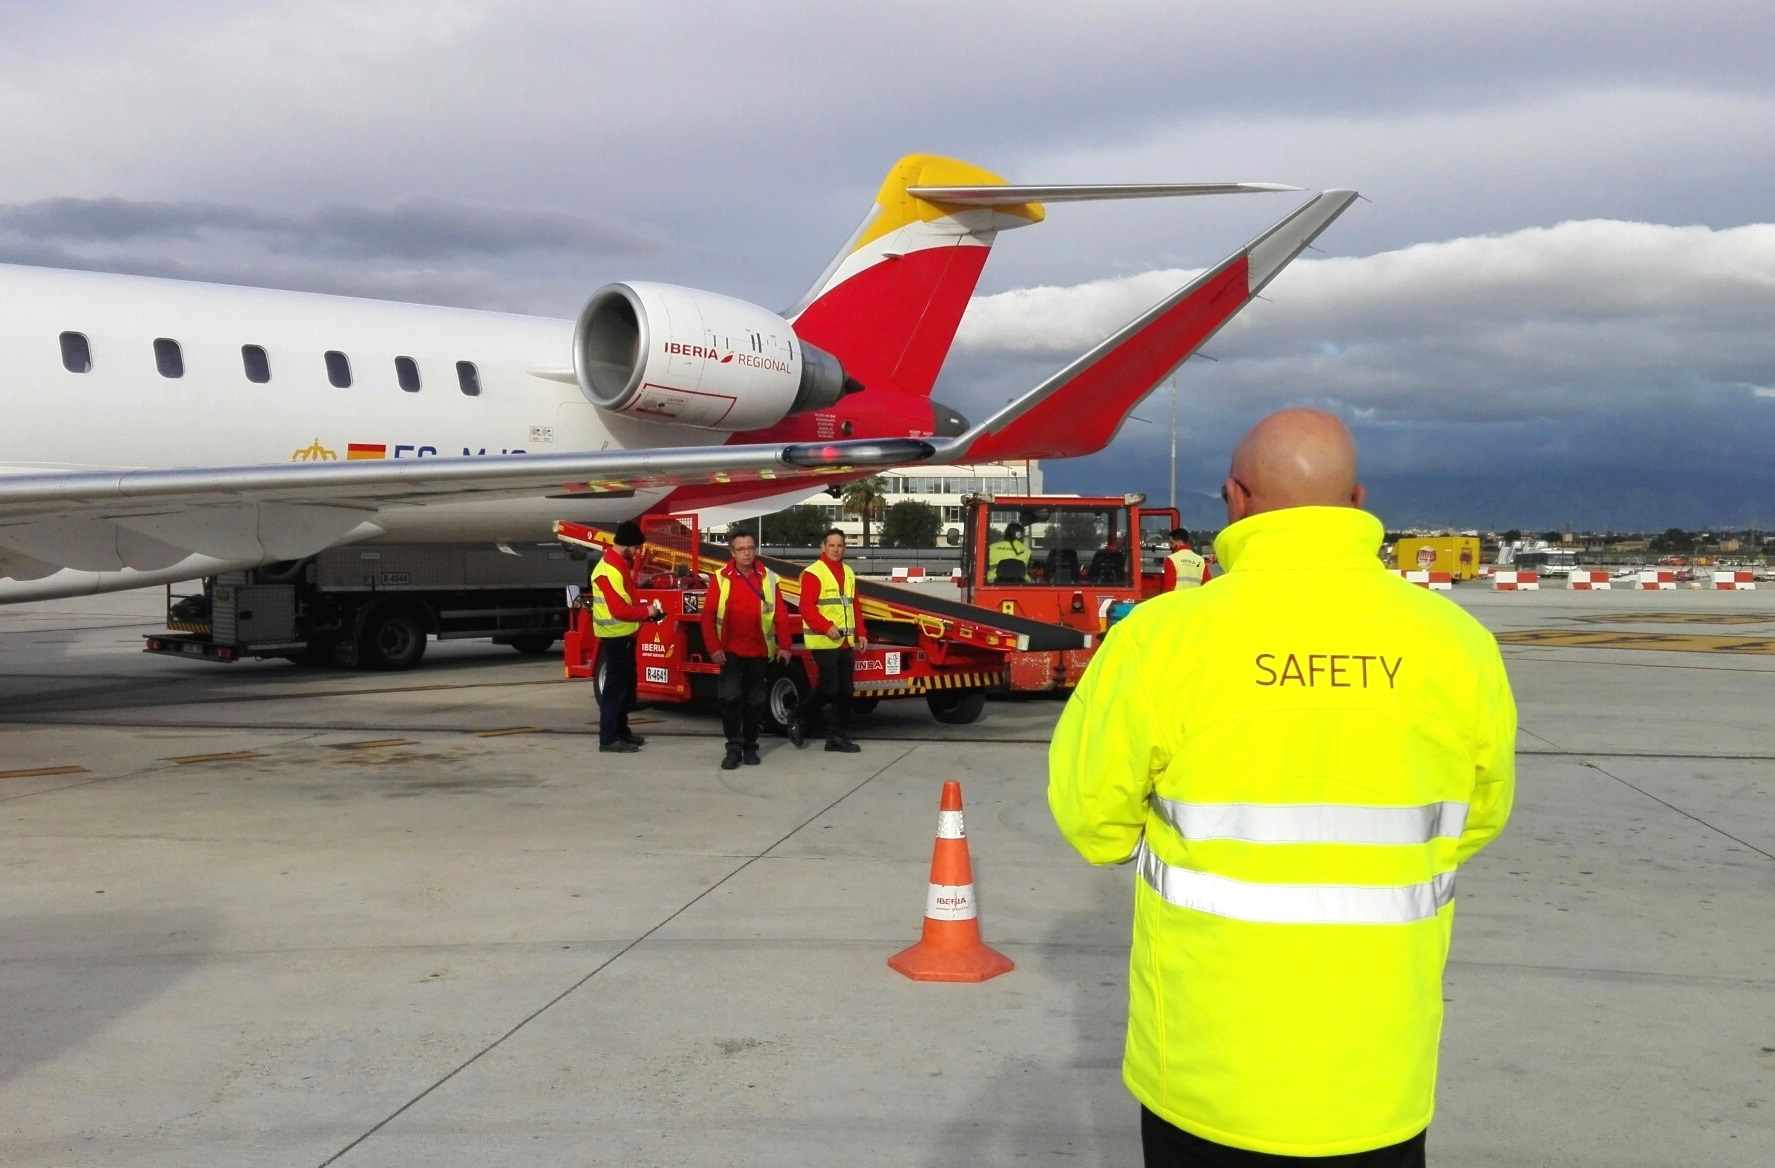 Palma de Mallorca, among the 15 airports in Europe with the most traffic in 2021, where the IBAS safety policy stands out for its excellent results.